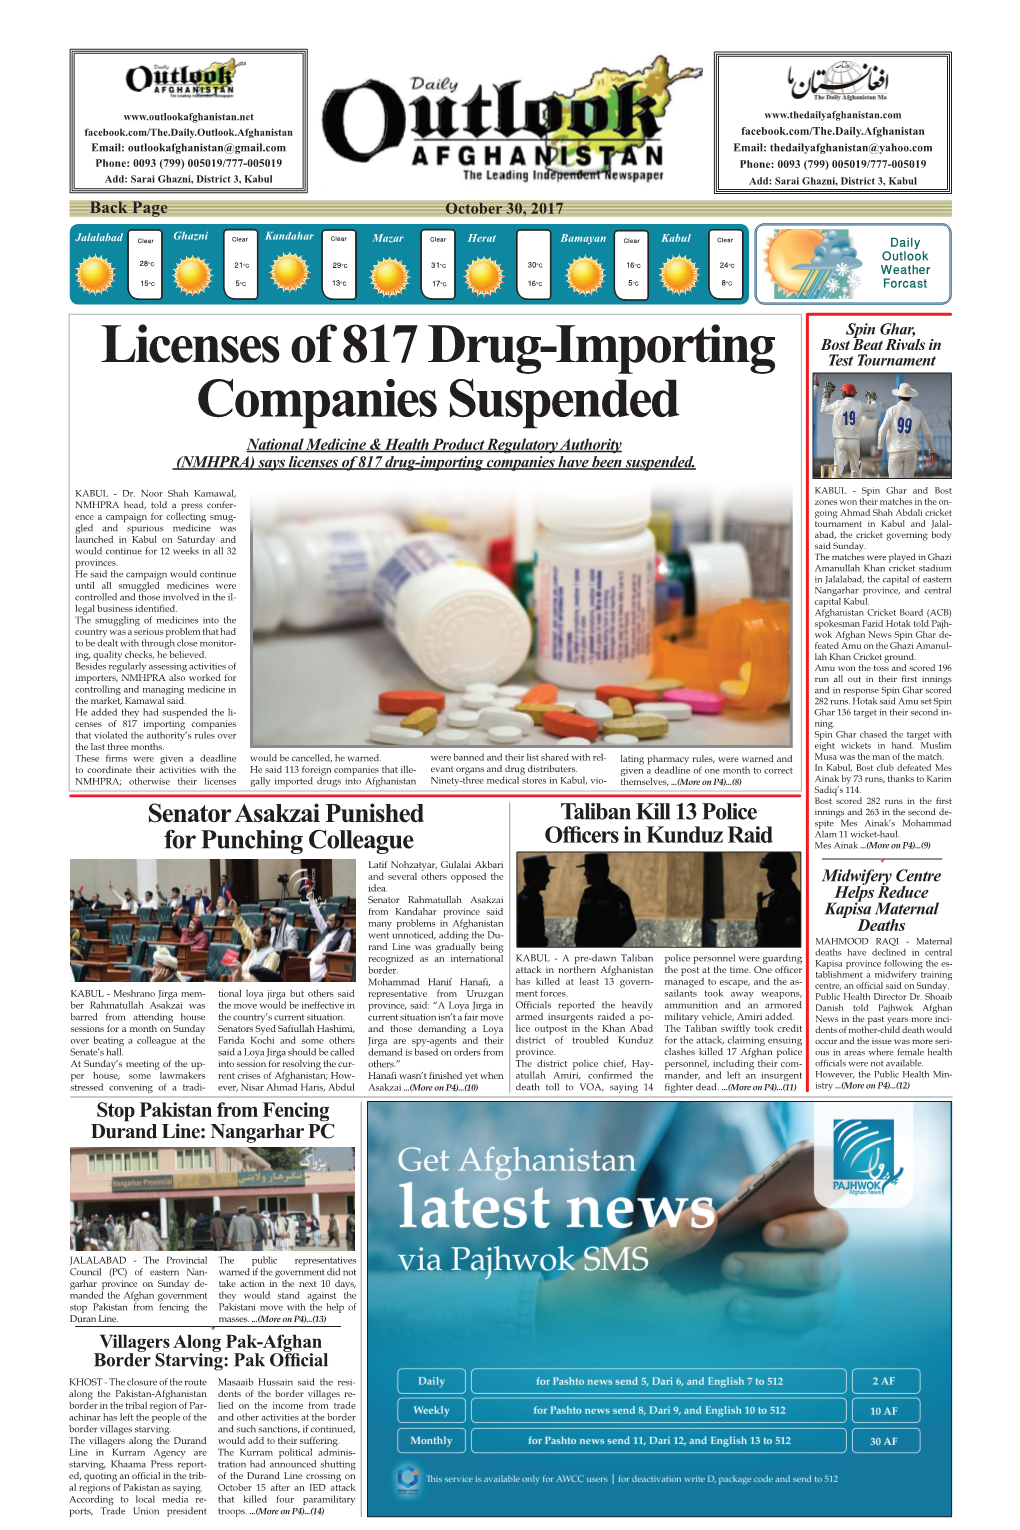 Licenses of 817 Drug-Importing Companies Suspended